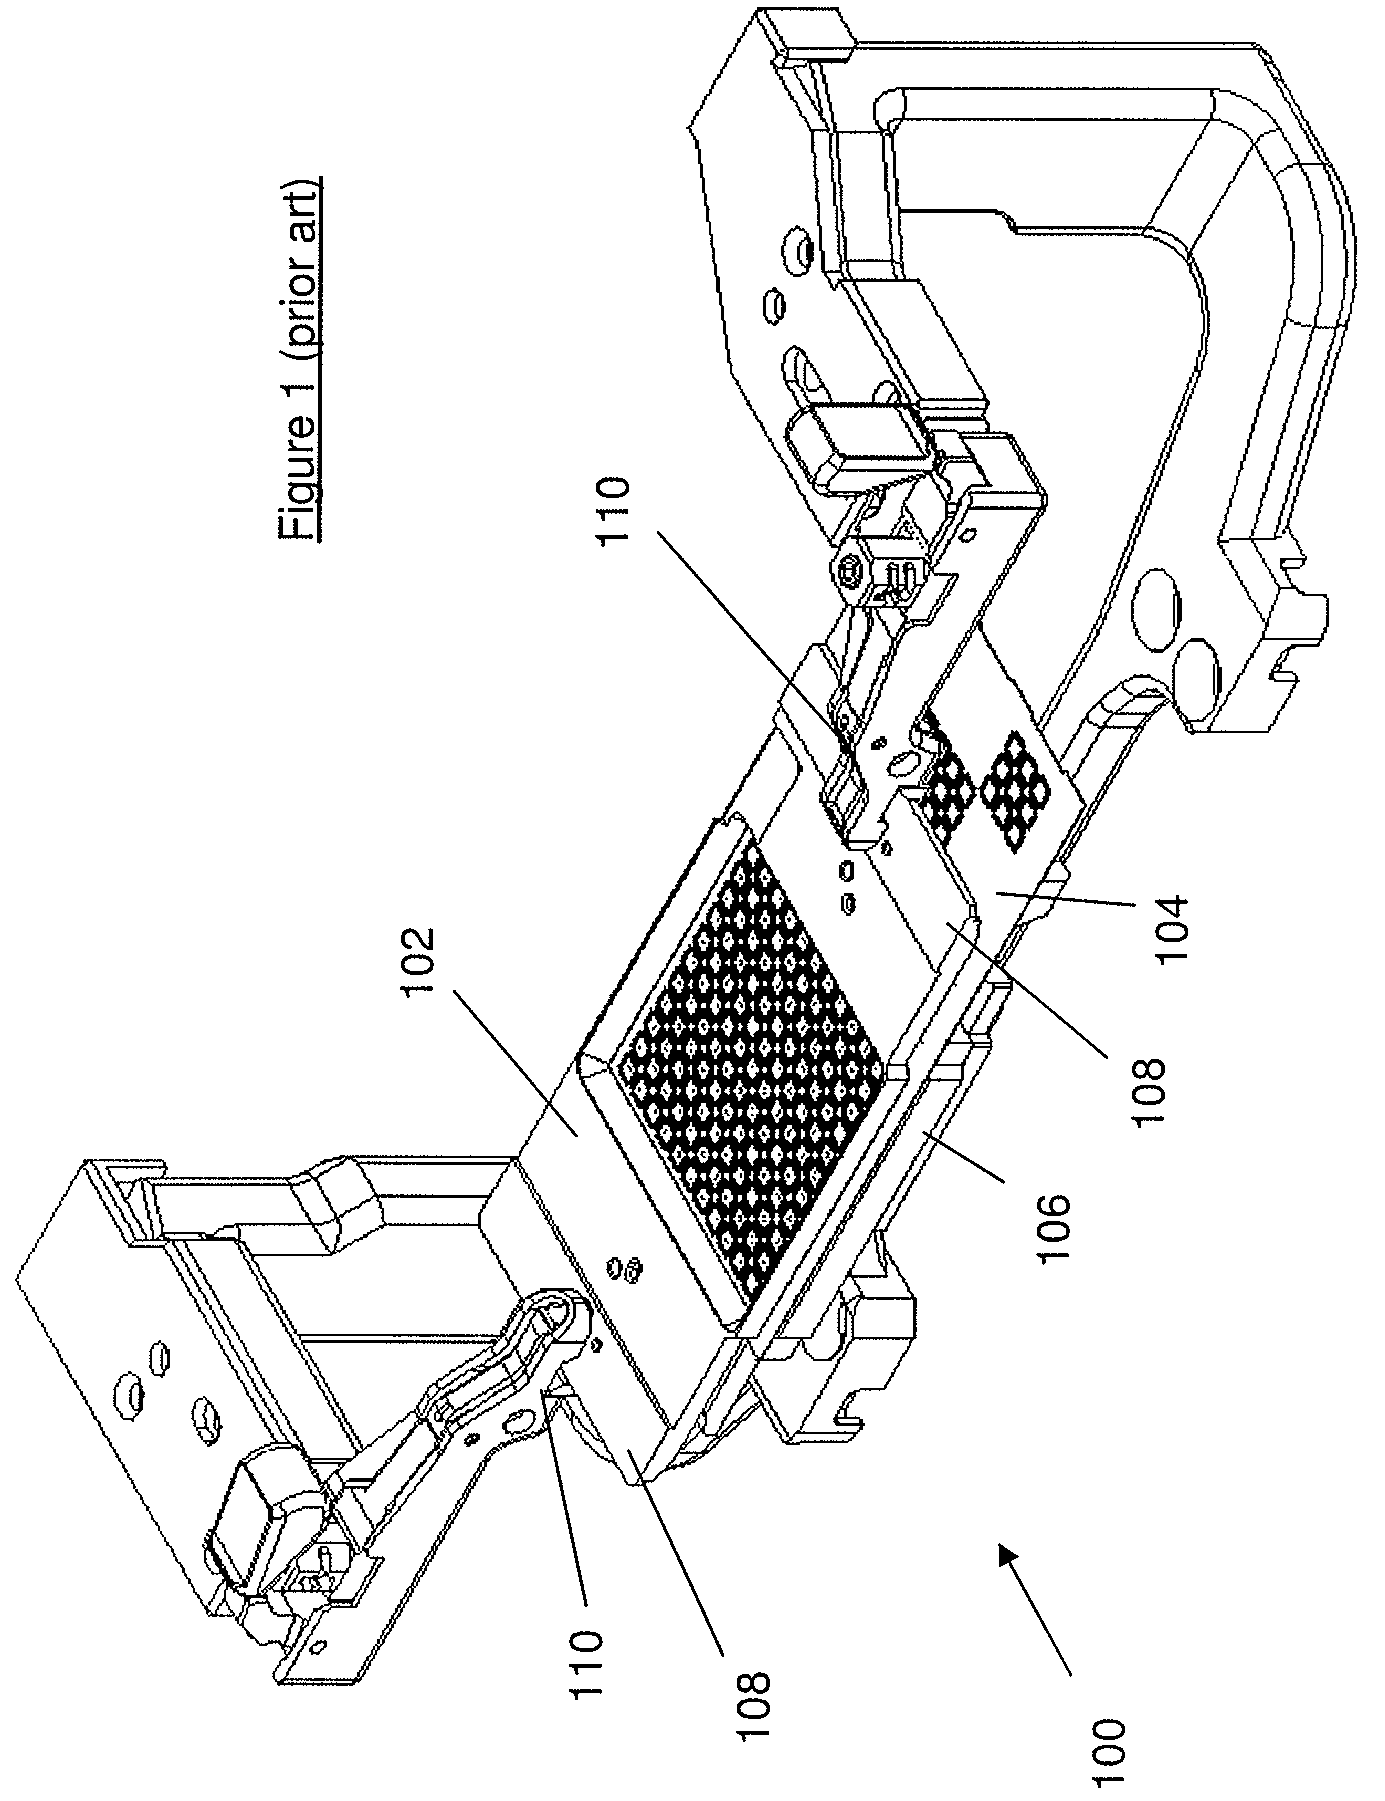 Lead frame support plate and window clamp for wire bonding machines